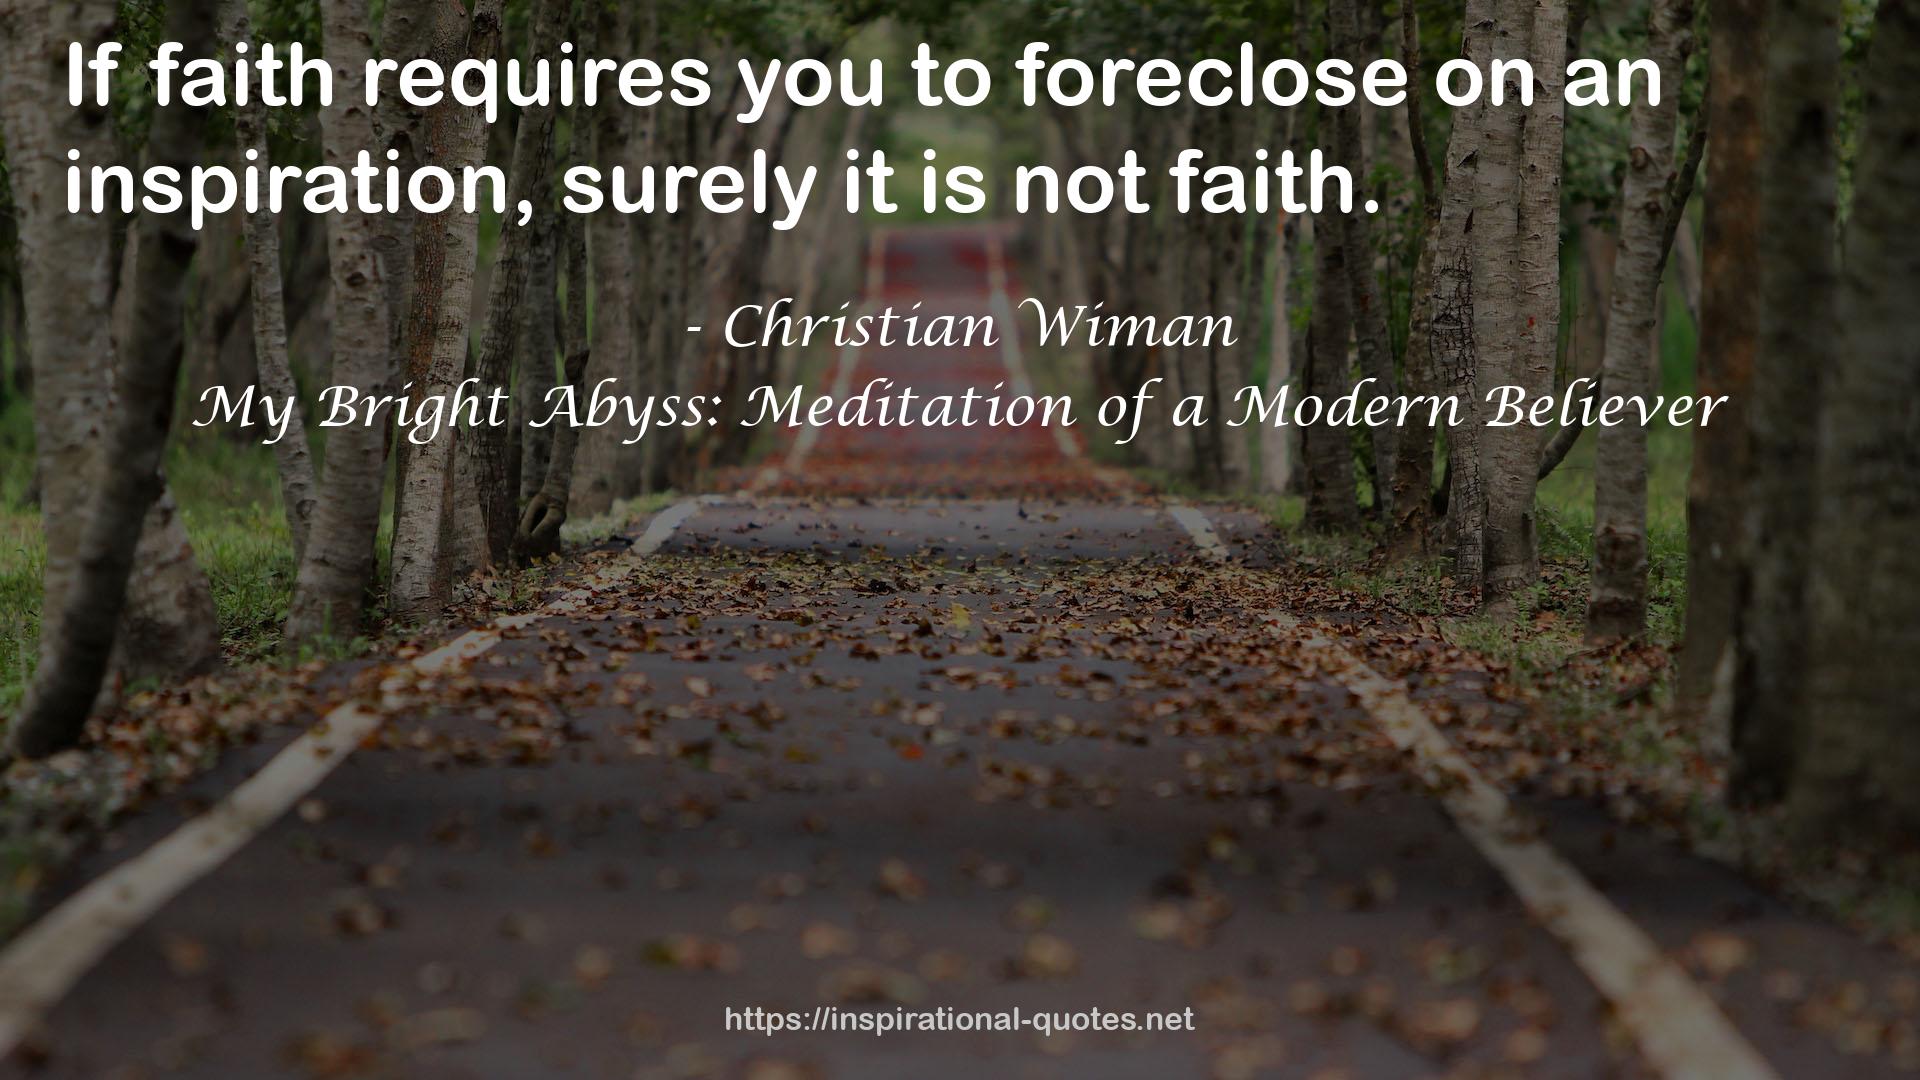 My Bright Abyss: Meditation of a Modern Believer QUOTES